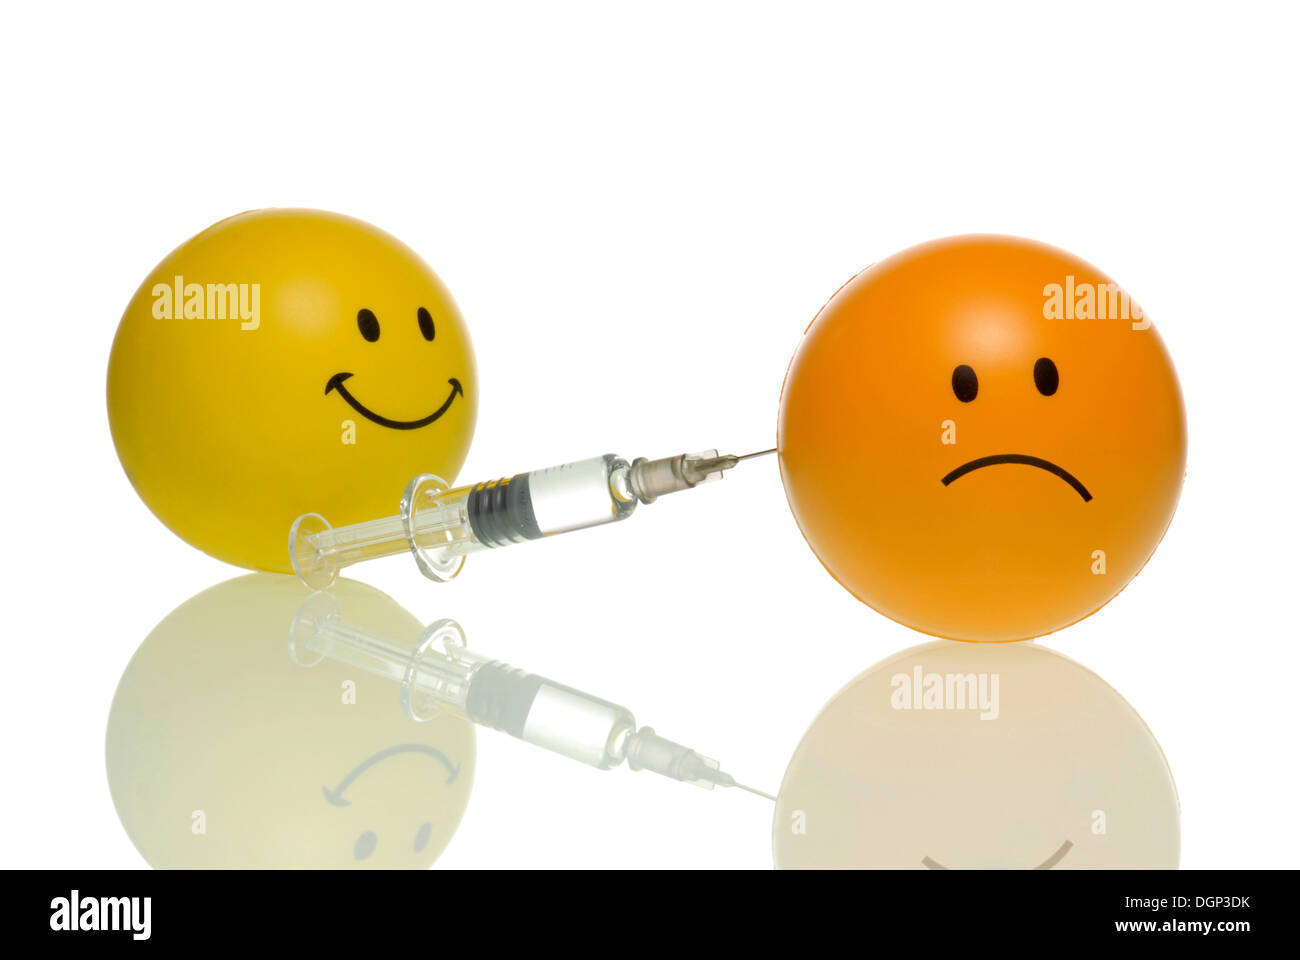 A smiley injects a frowning smiley, frownie, symbolic image against flu shots Stock Photo